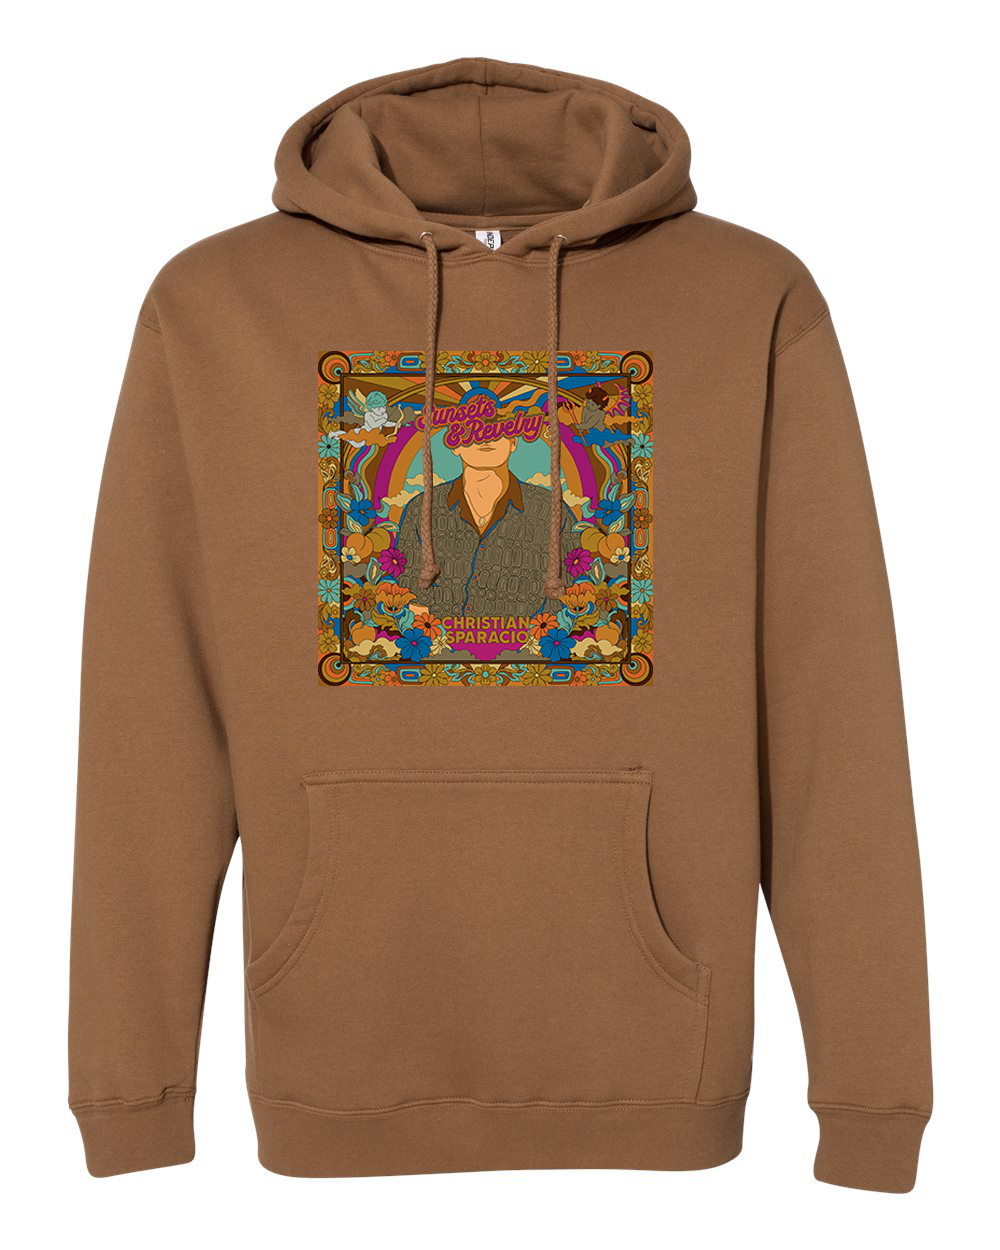 Christian Sparacio : Sunsets and Revelry Hoodie